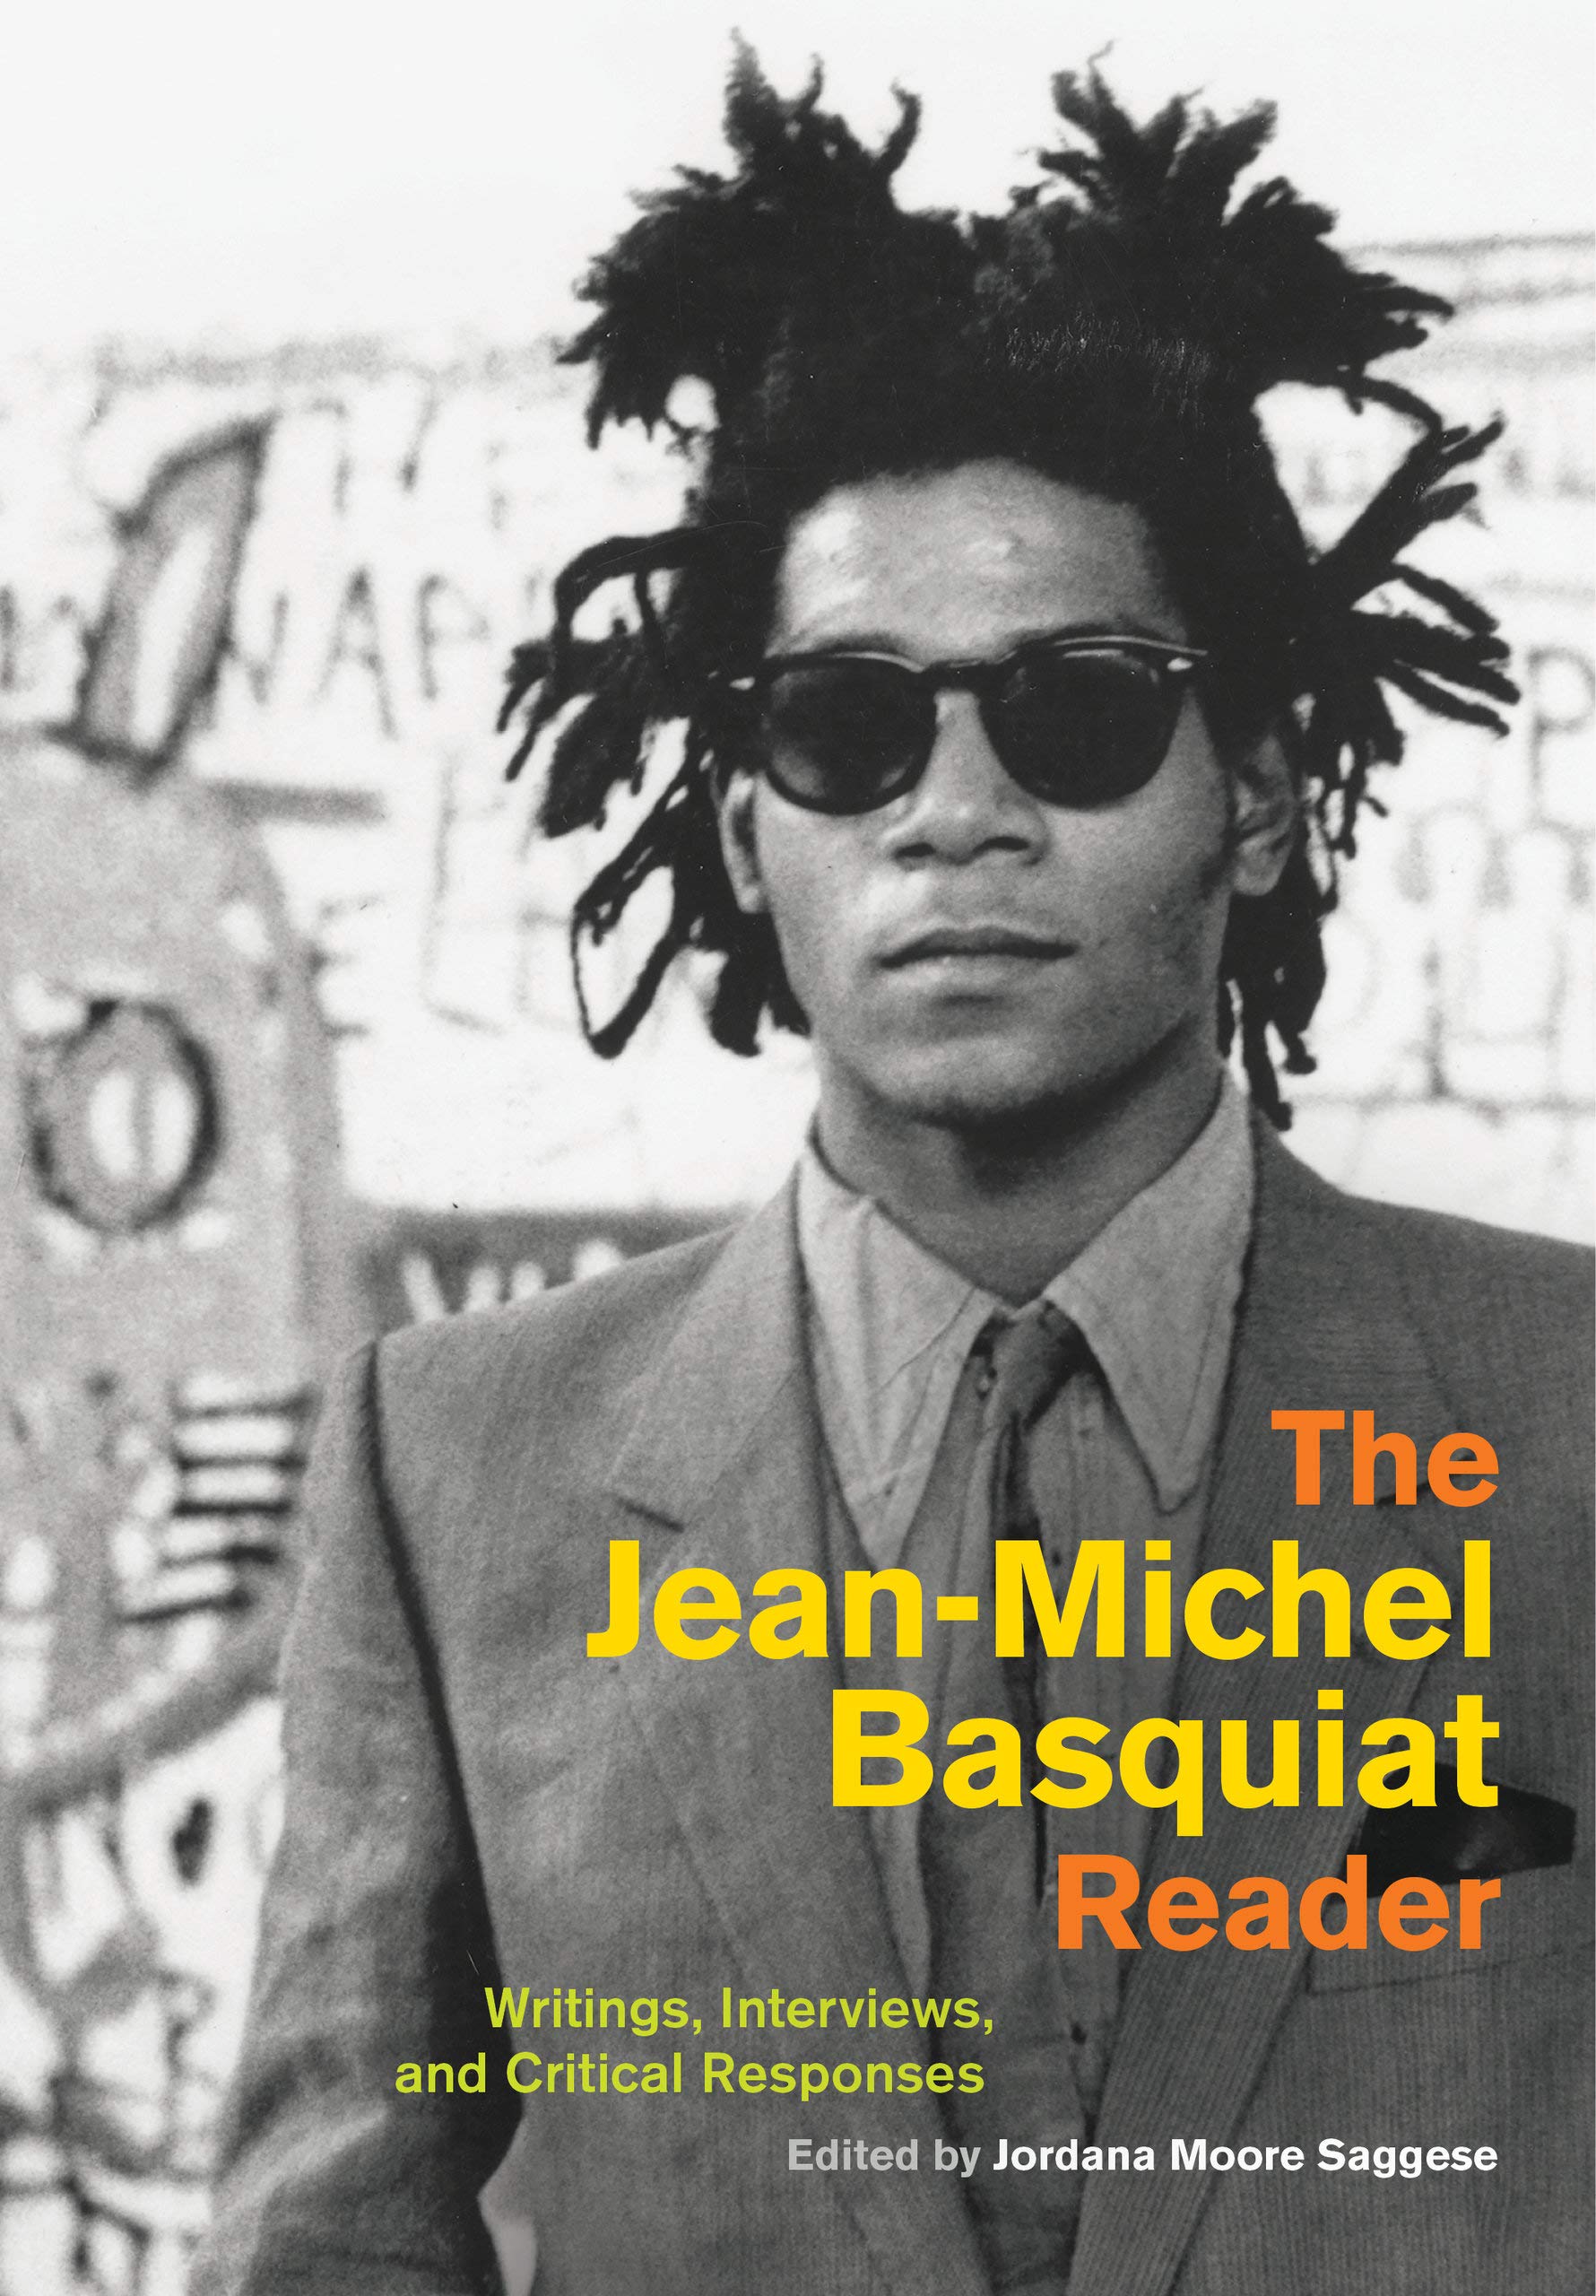 The Jean-Michel Basquiat Reader: Writings, Interviews, and Critical Responses (Documents of Twentieth-Century Art)